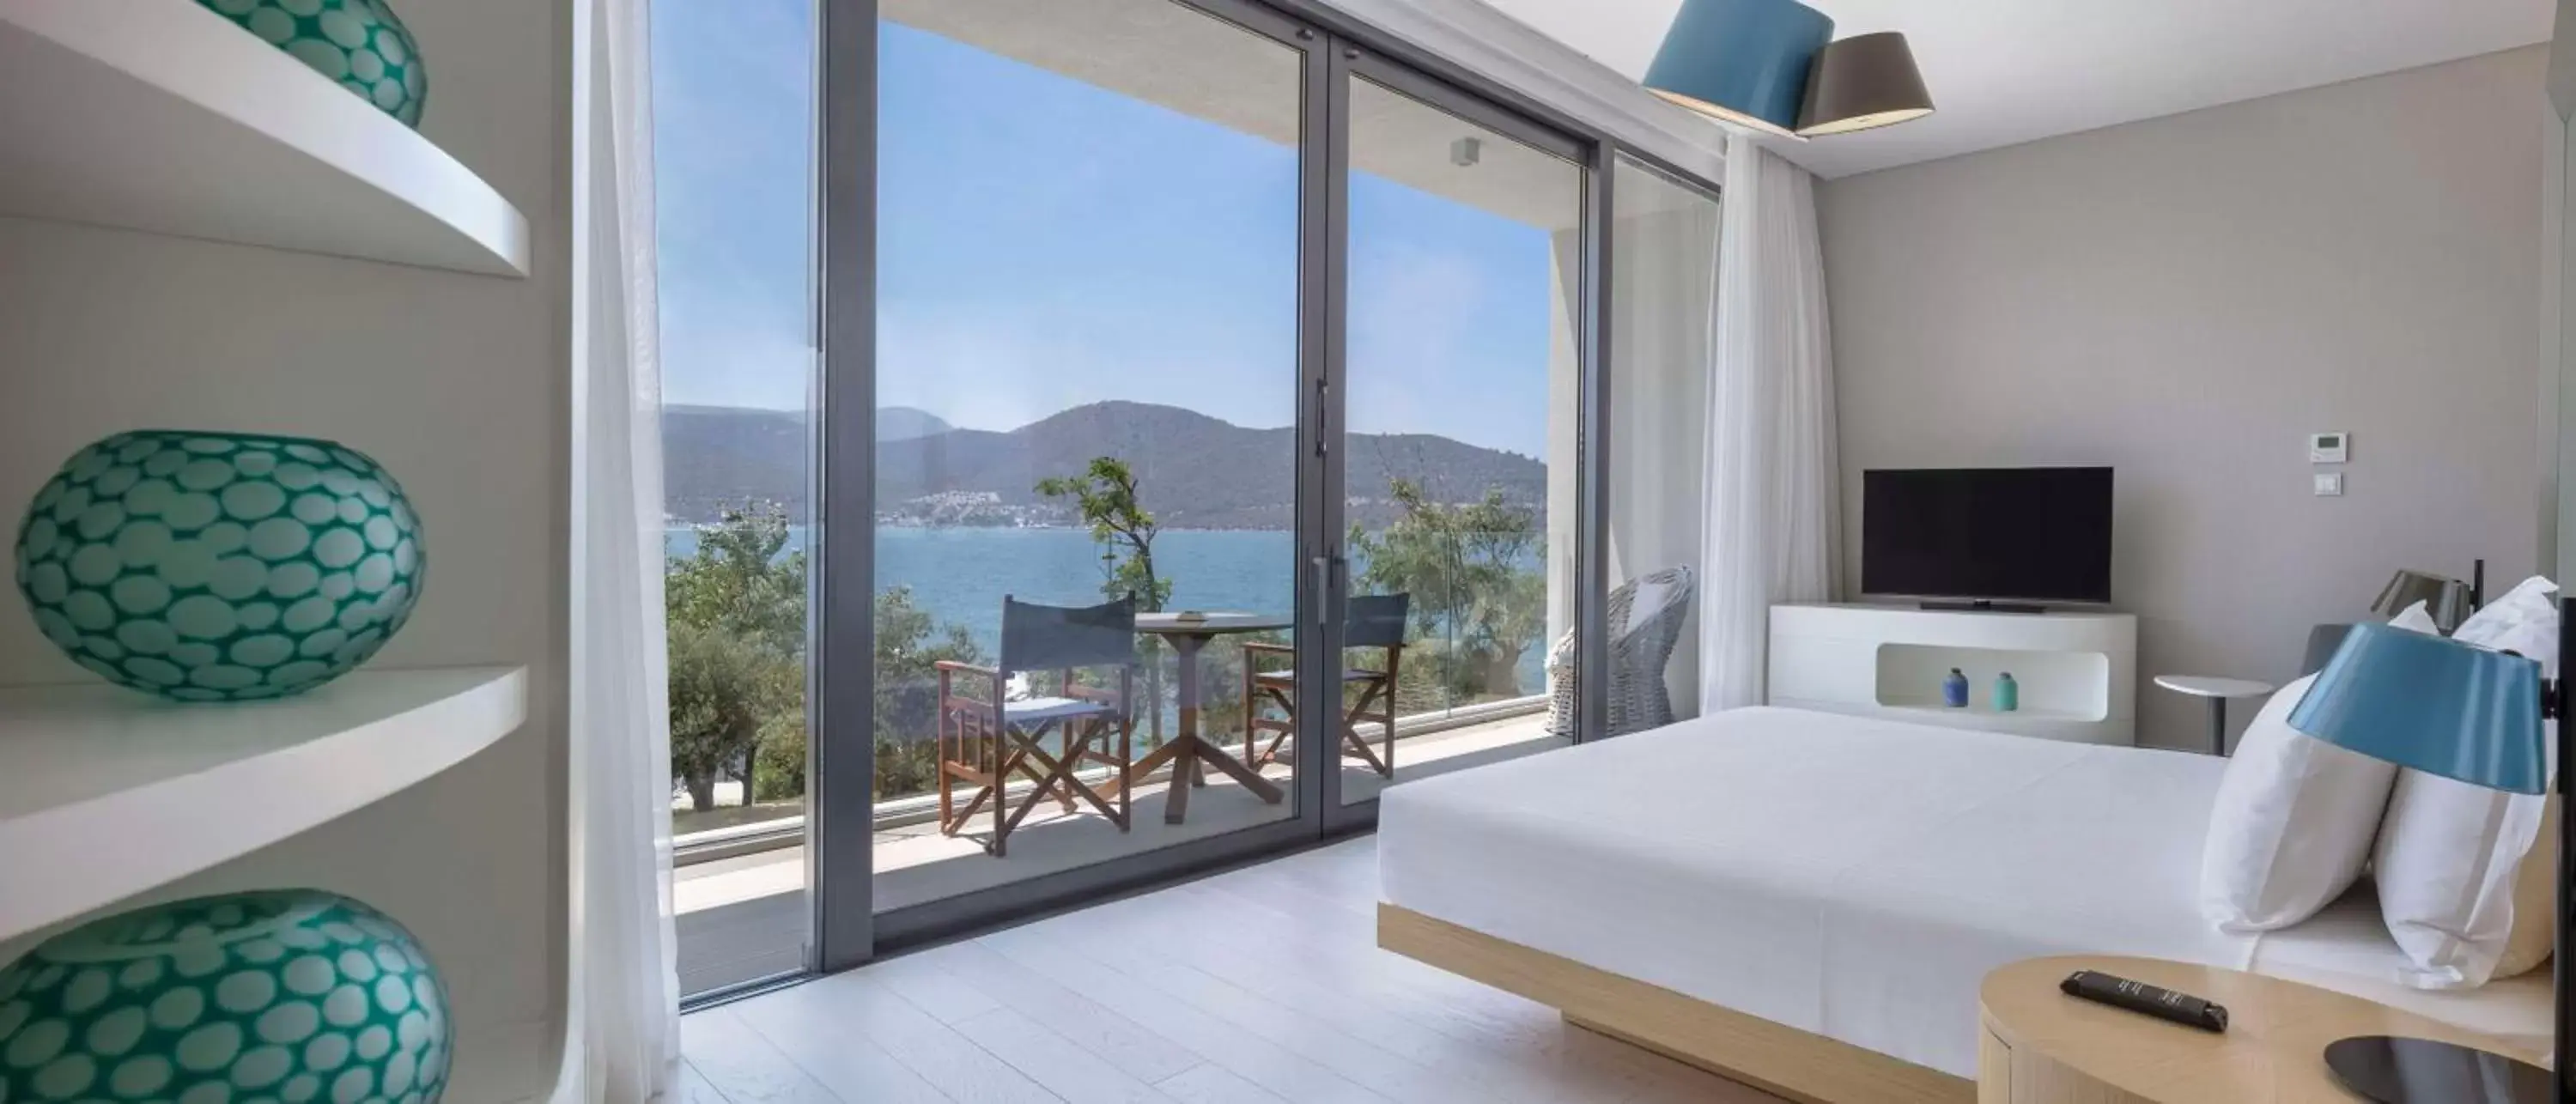 View (from property/room) in Susona Bodrum, LXR Hotels & Resorts